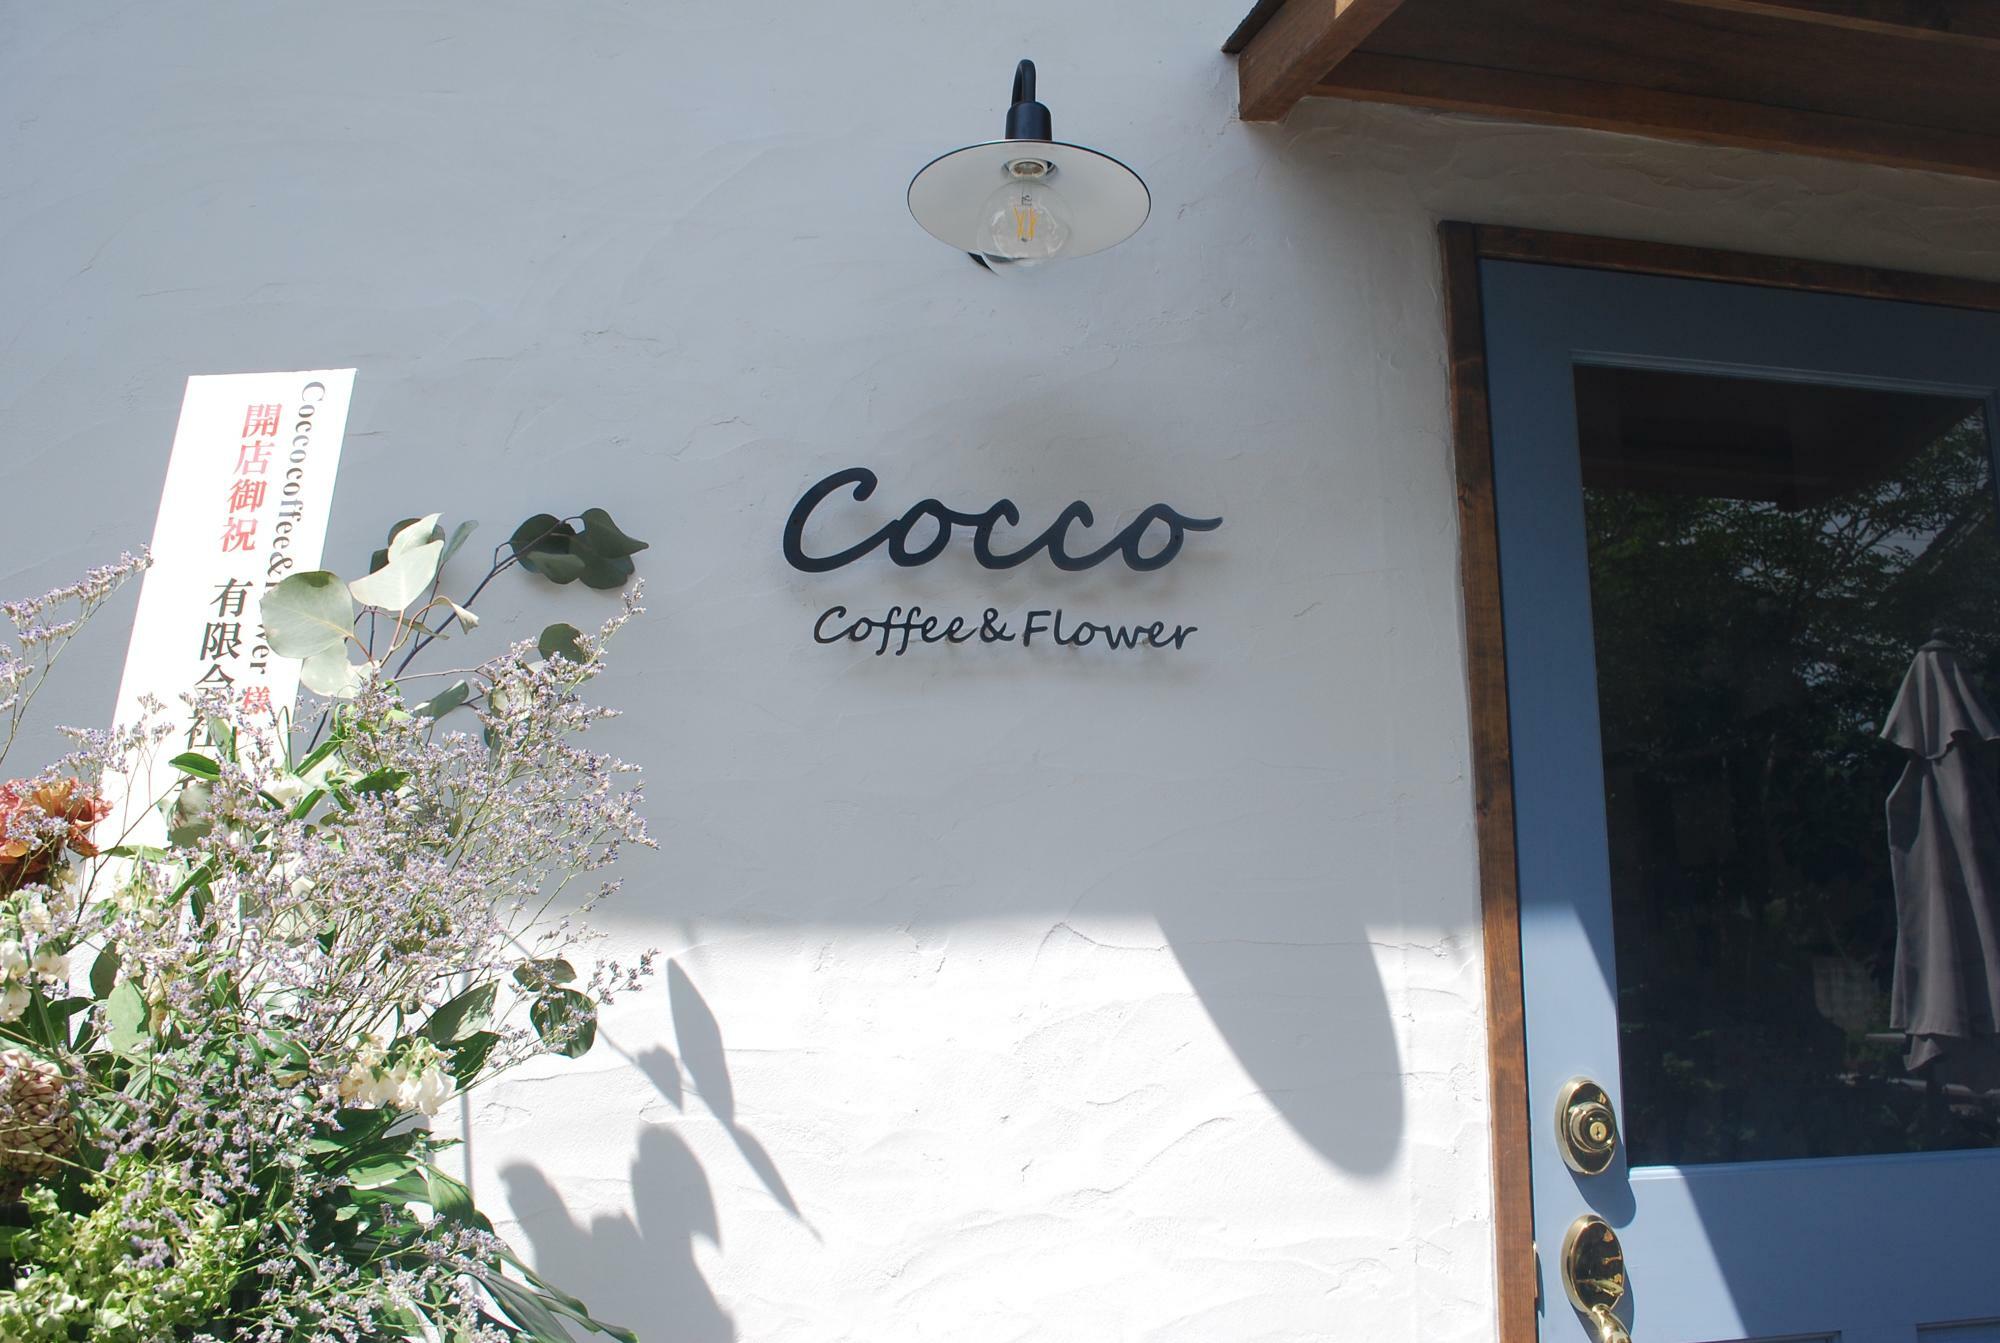 「Cocco Coffee&Flower」さん外観